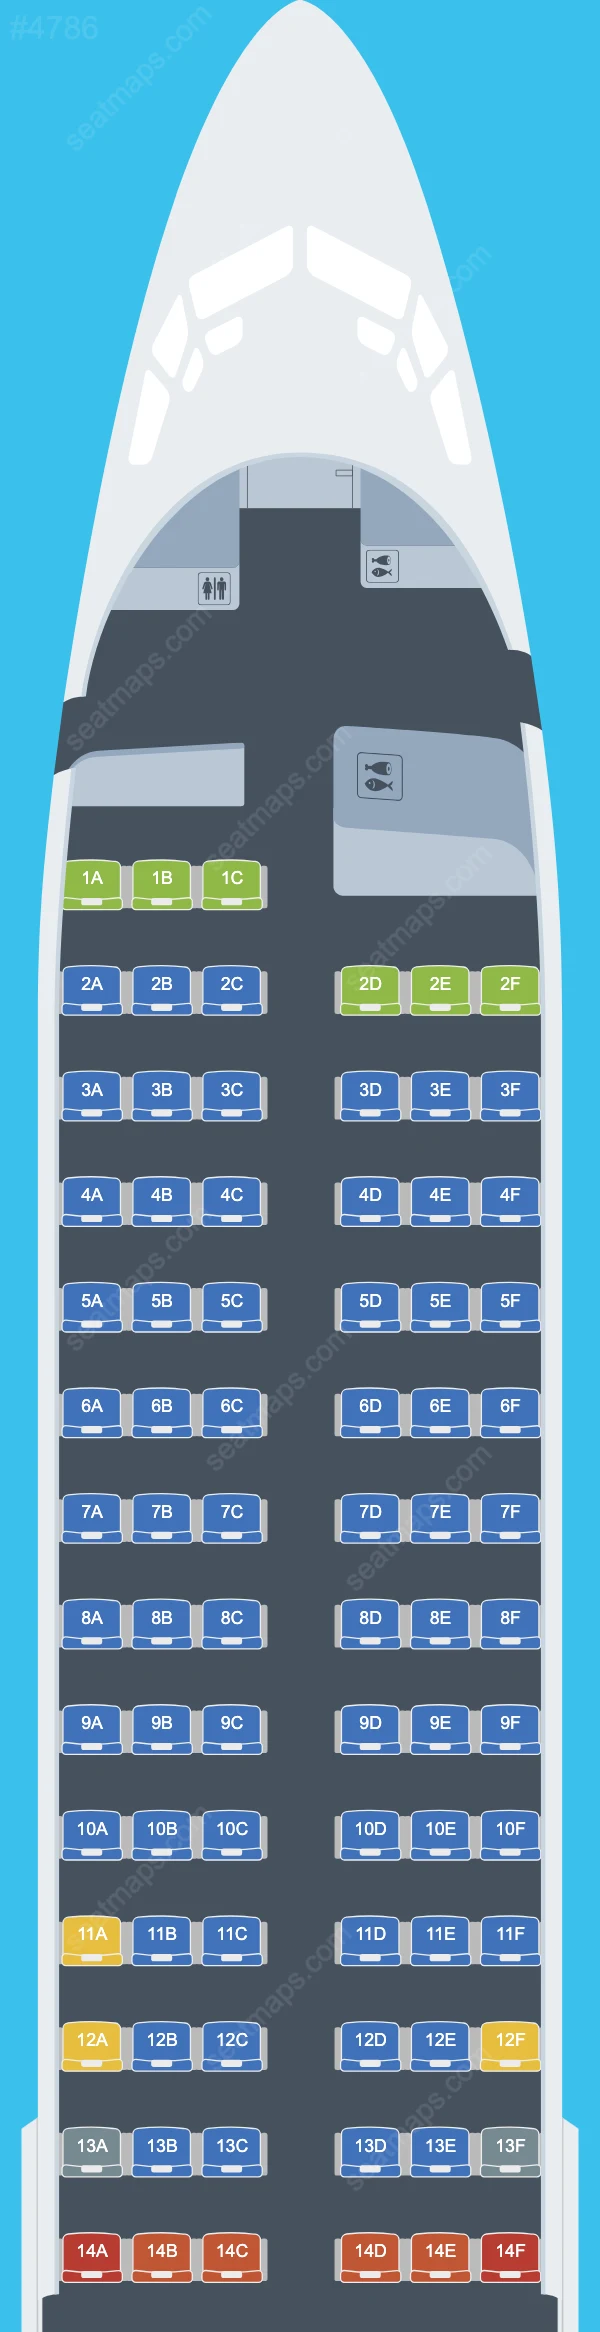 Eastar Jet Boeing 737-800 seatmap mobile preview